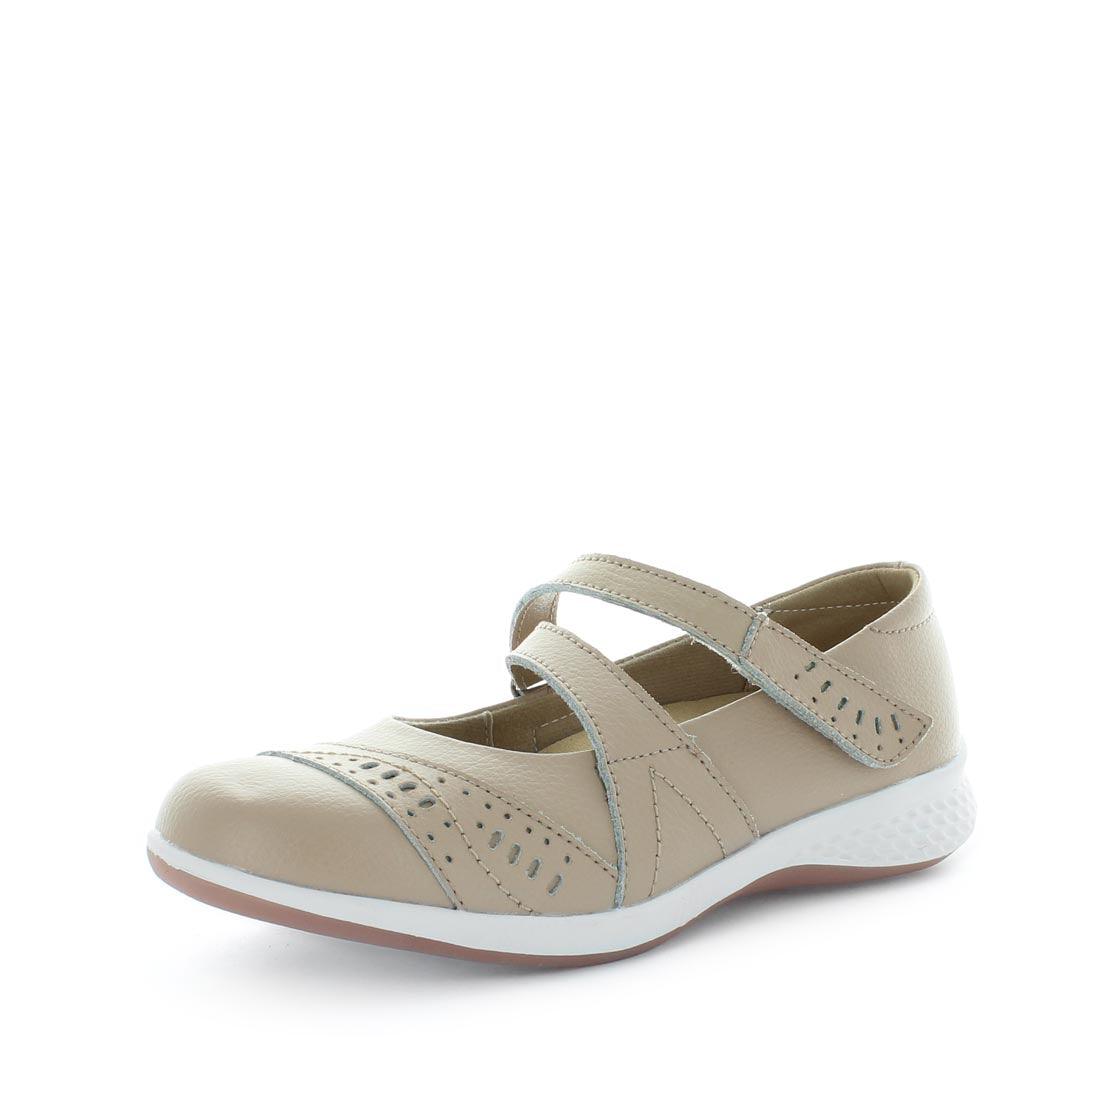 CECILIA - Just Bee Comfort just bee shoes, comfort shoe, comfortable womens shoes, womens shoes, ladies shoes, casual womens slip on, elastic pull tab shoes,, flexible womens casual shoes, womens casual, womens shoes, leather shoes, leather ladies shoes, quality leather shoes, trans-seasonal shoes, just bee, just bee leather (4675901554767)